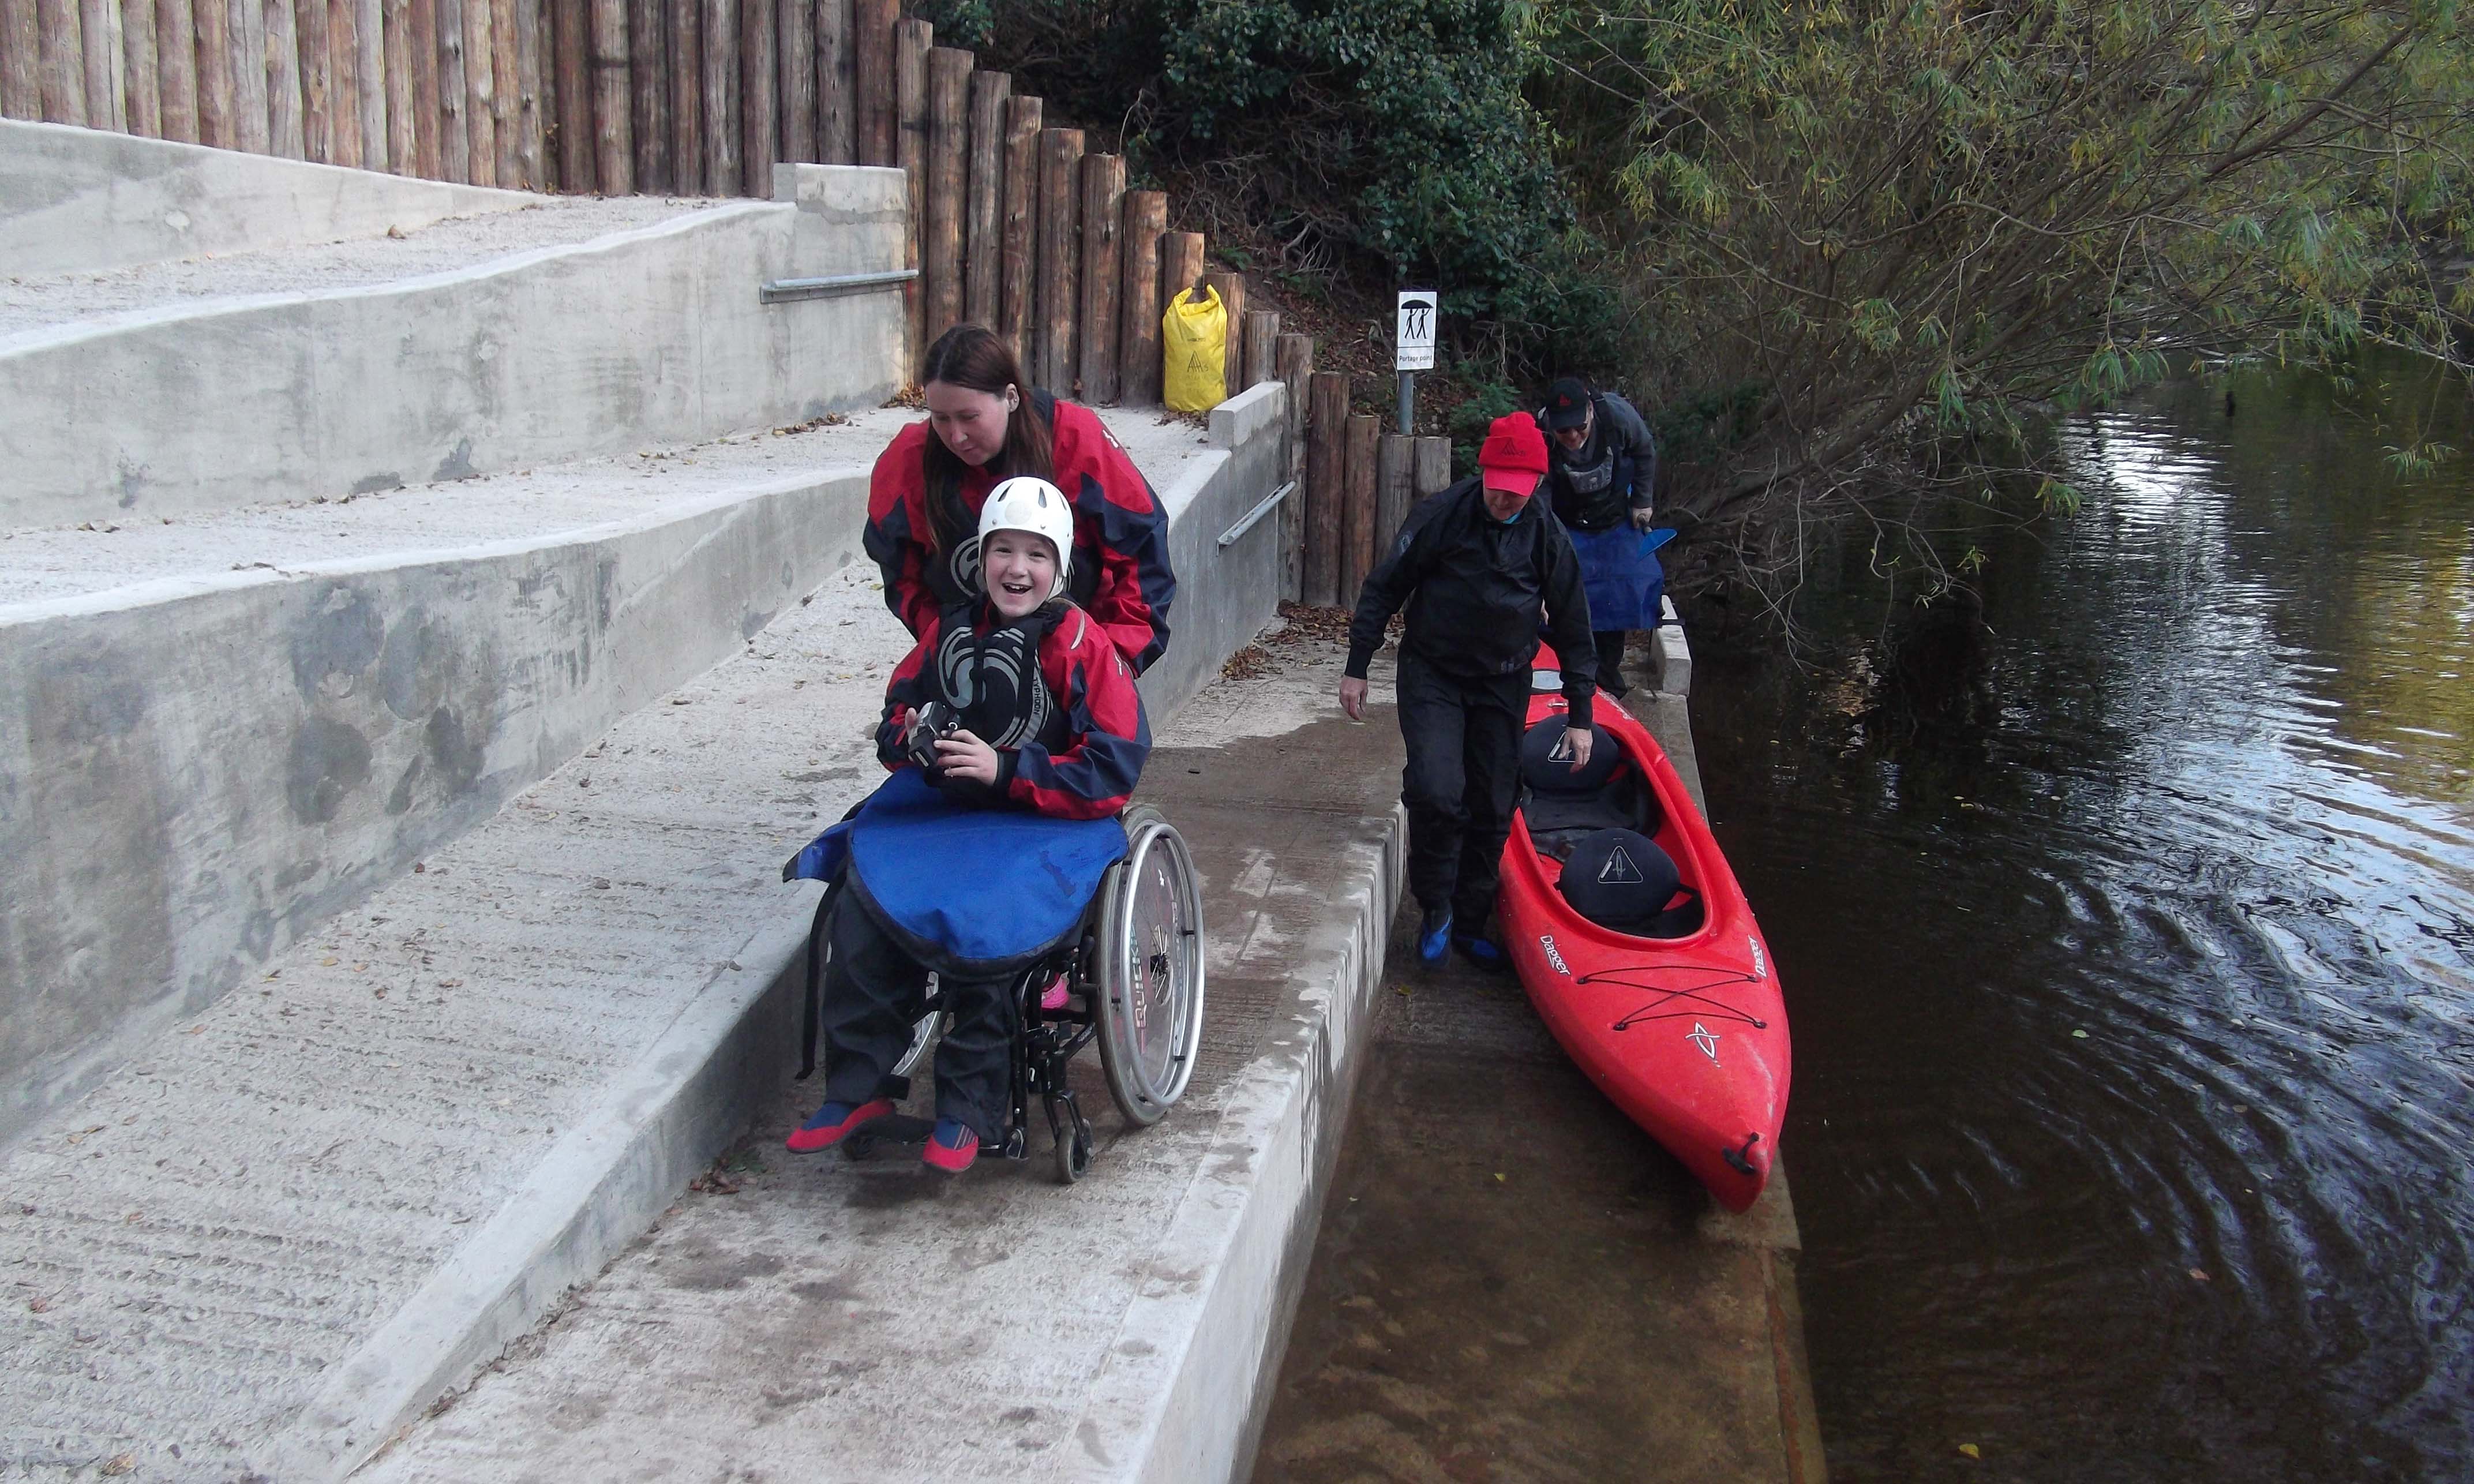 Canoe access with wheelchair user at Kerne Bridge